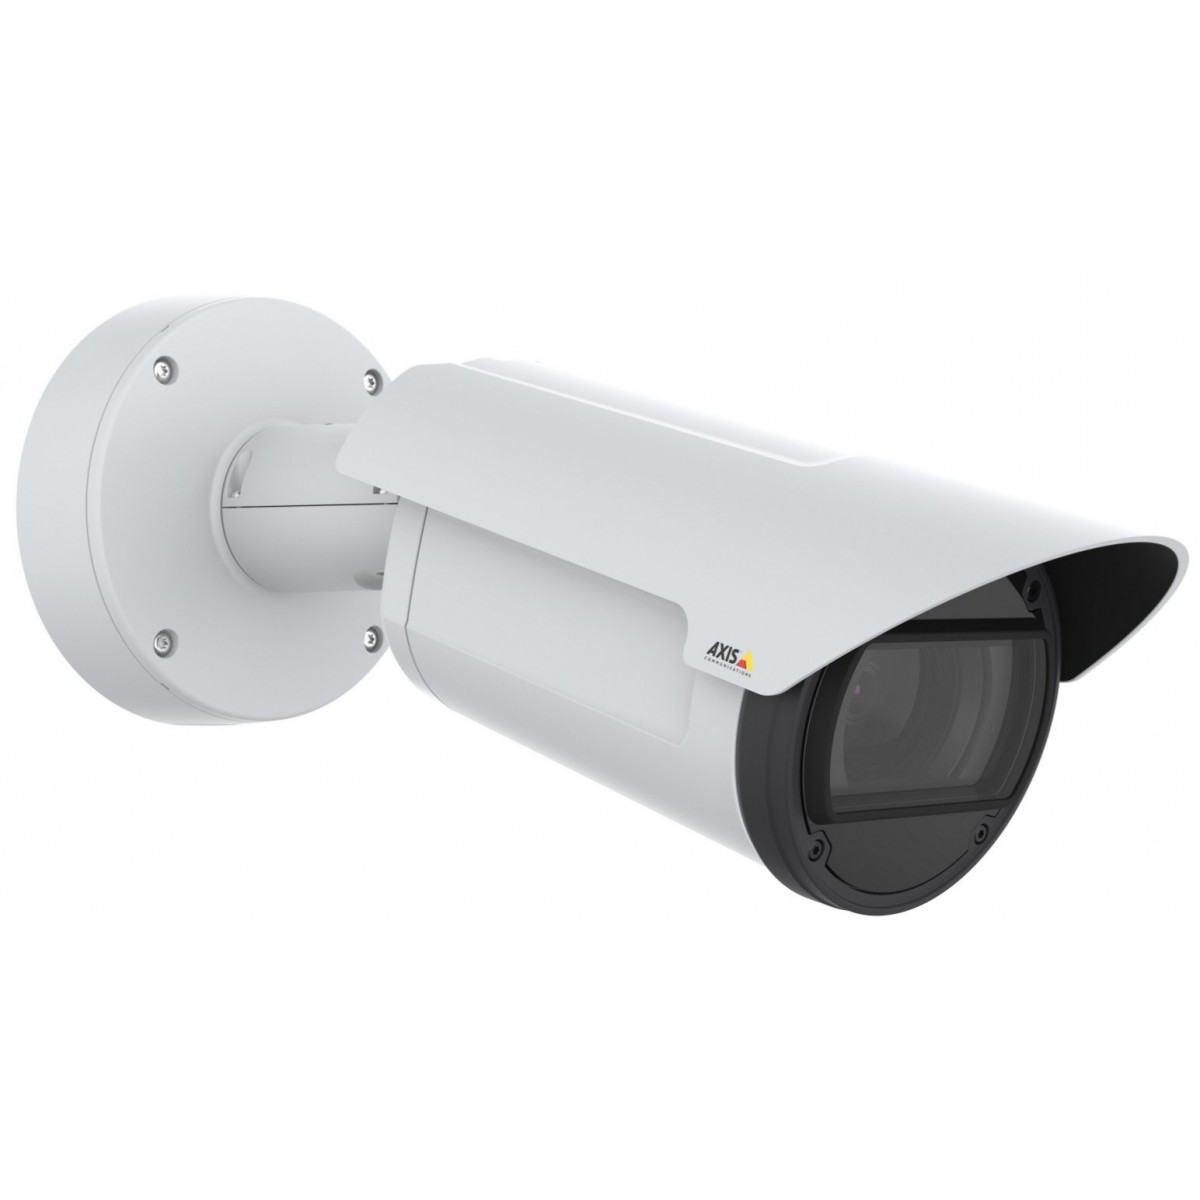 Axis Q1786-LE - IP security camera - Indoor & outdoor - Wired - Digital PTZ - Simplified Chinese - Traditional Chinese - German 